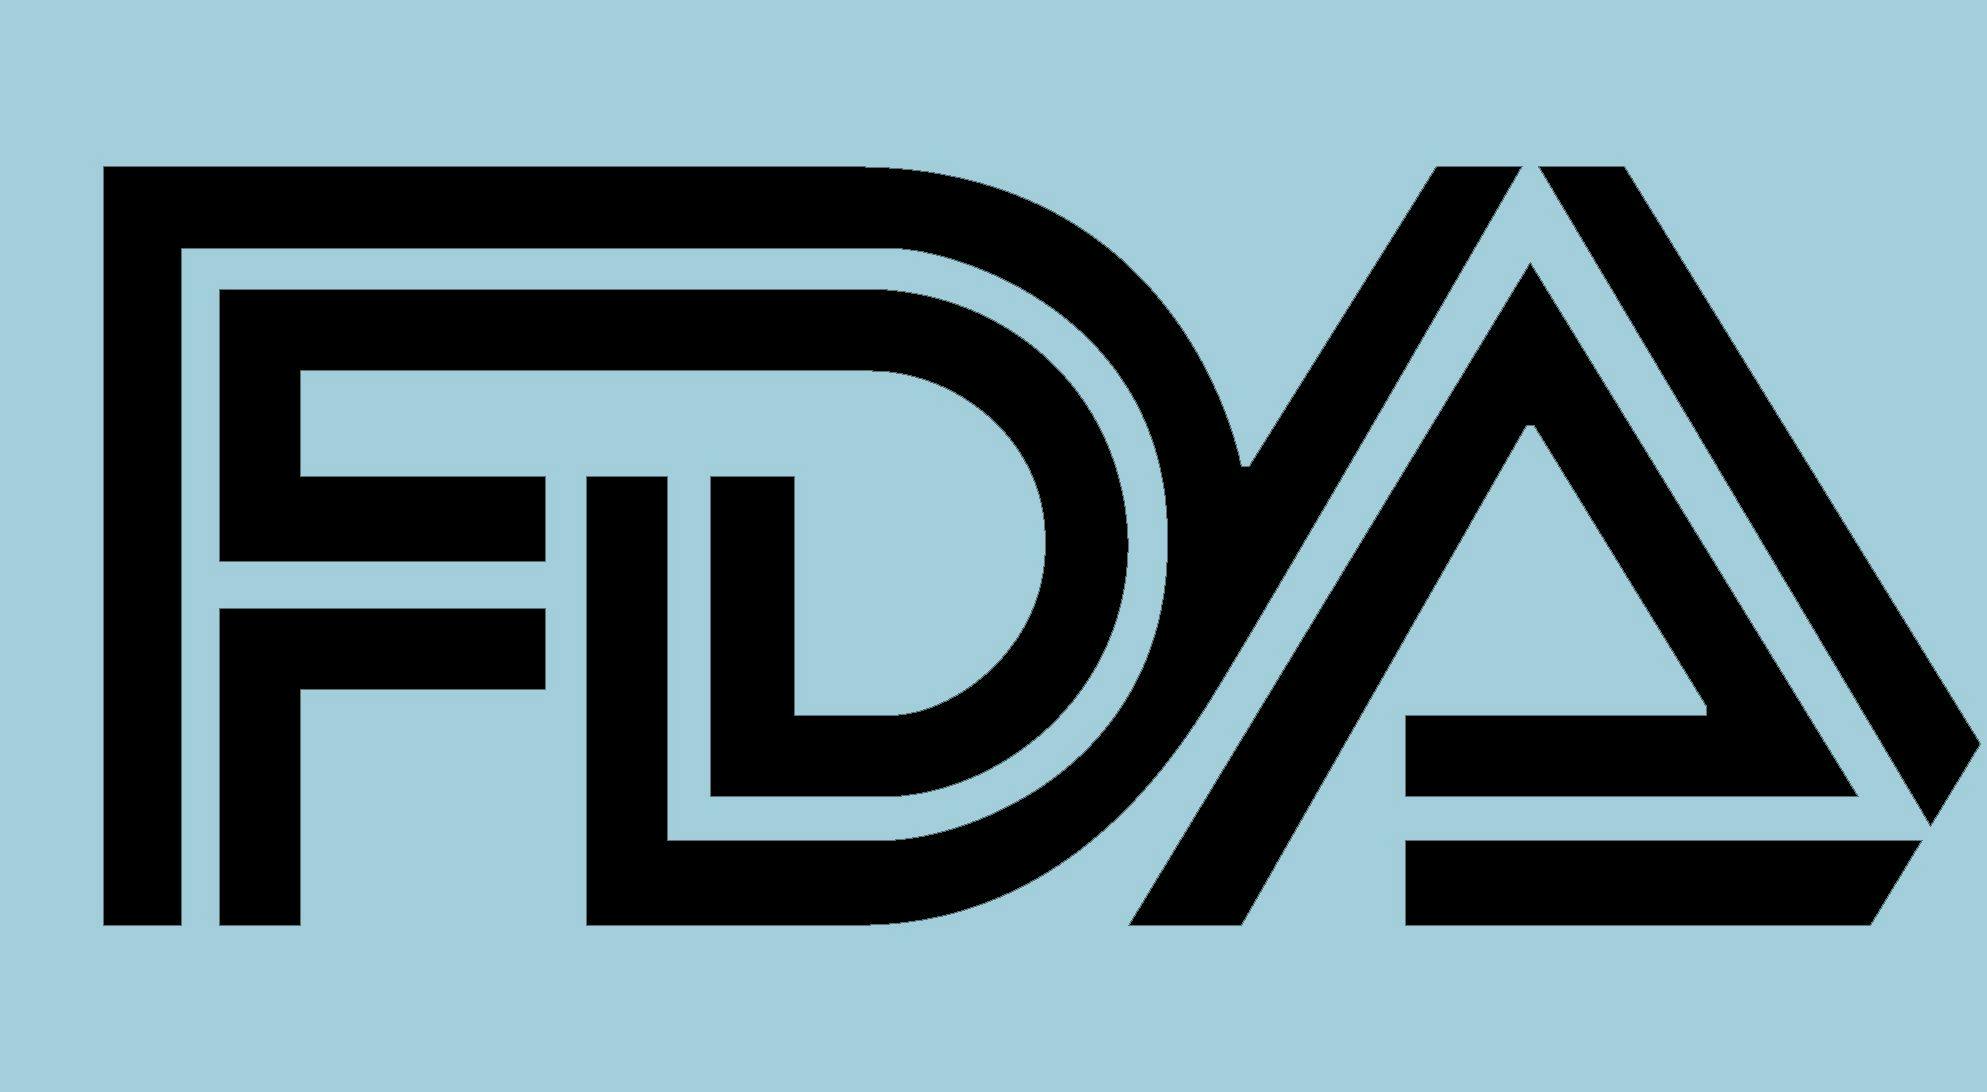 Image of the FDA logo on top of a light blue background.